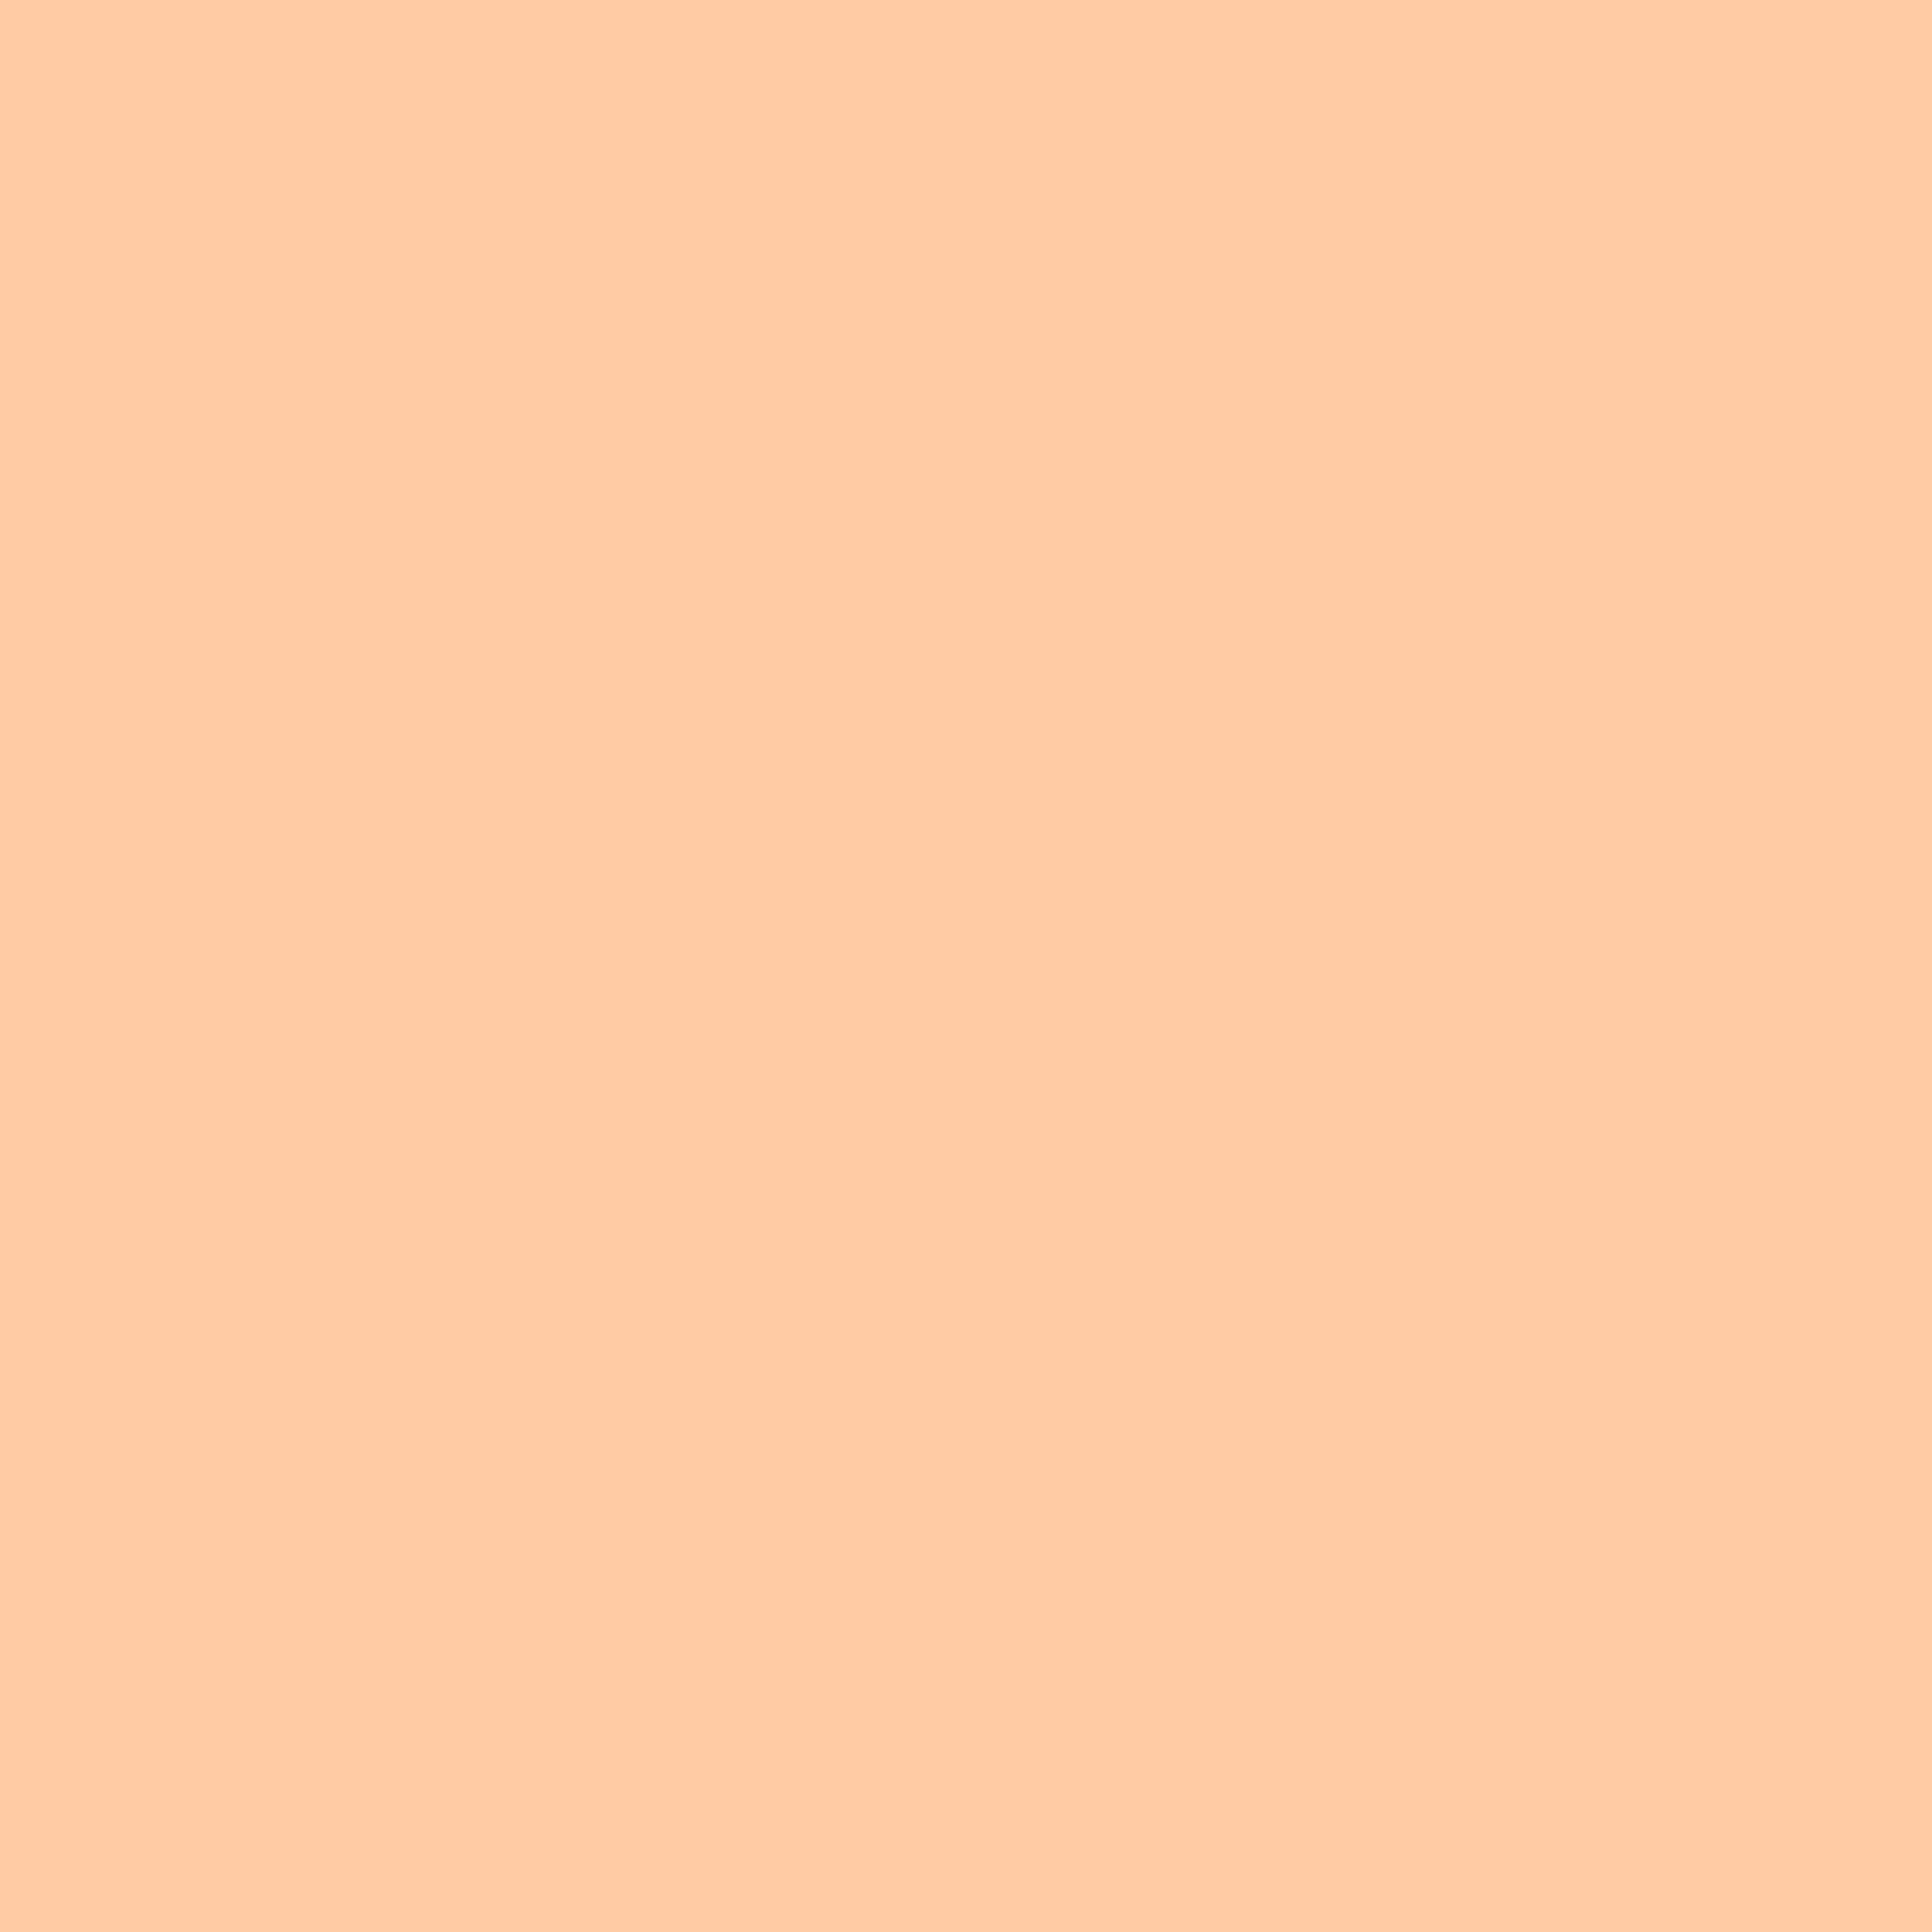 3600x3600 Deep Peach Solid Color Background